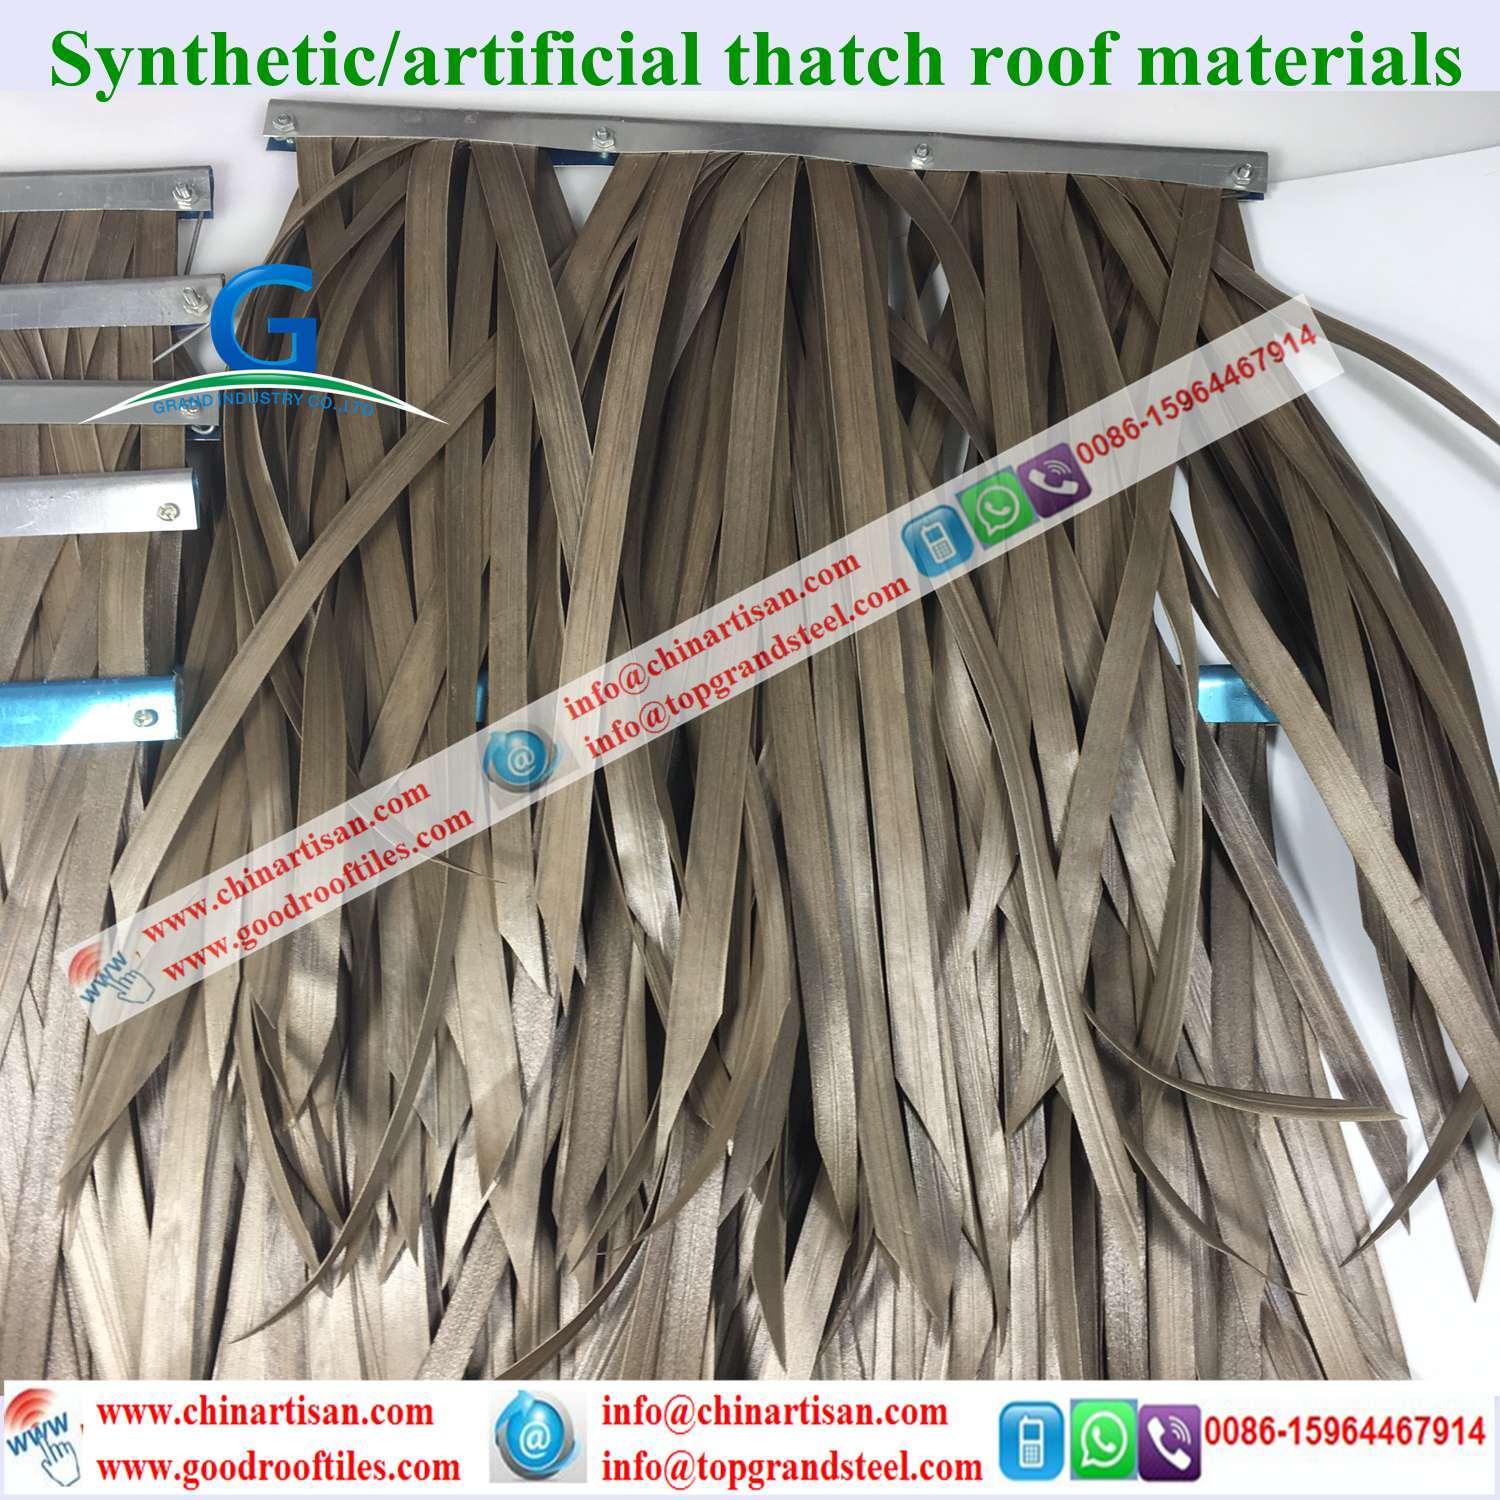 At020 Artificial Thatch Synthetic Thatch Plastic Palm Thatch Roofing Tile